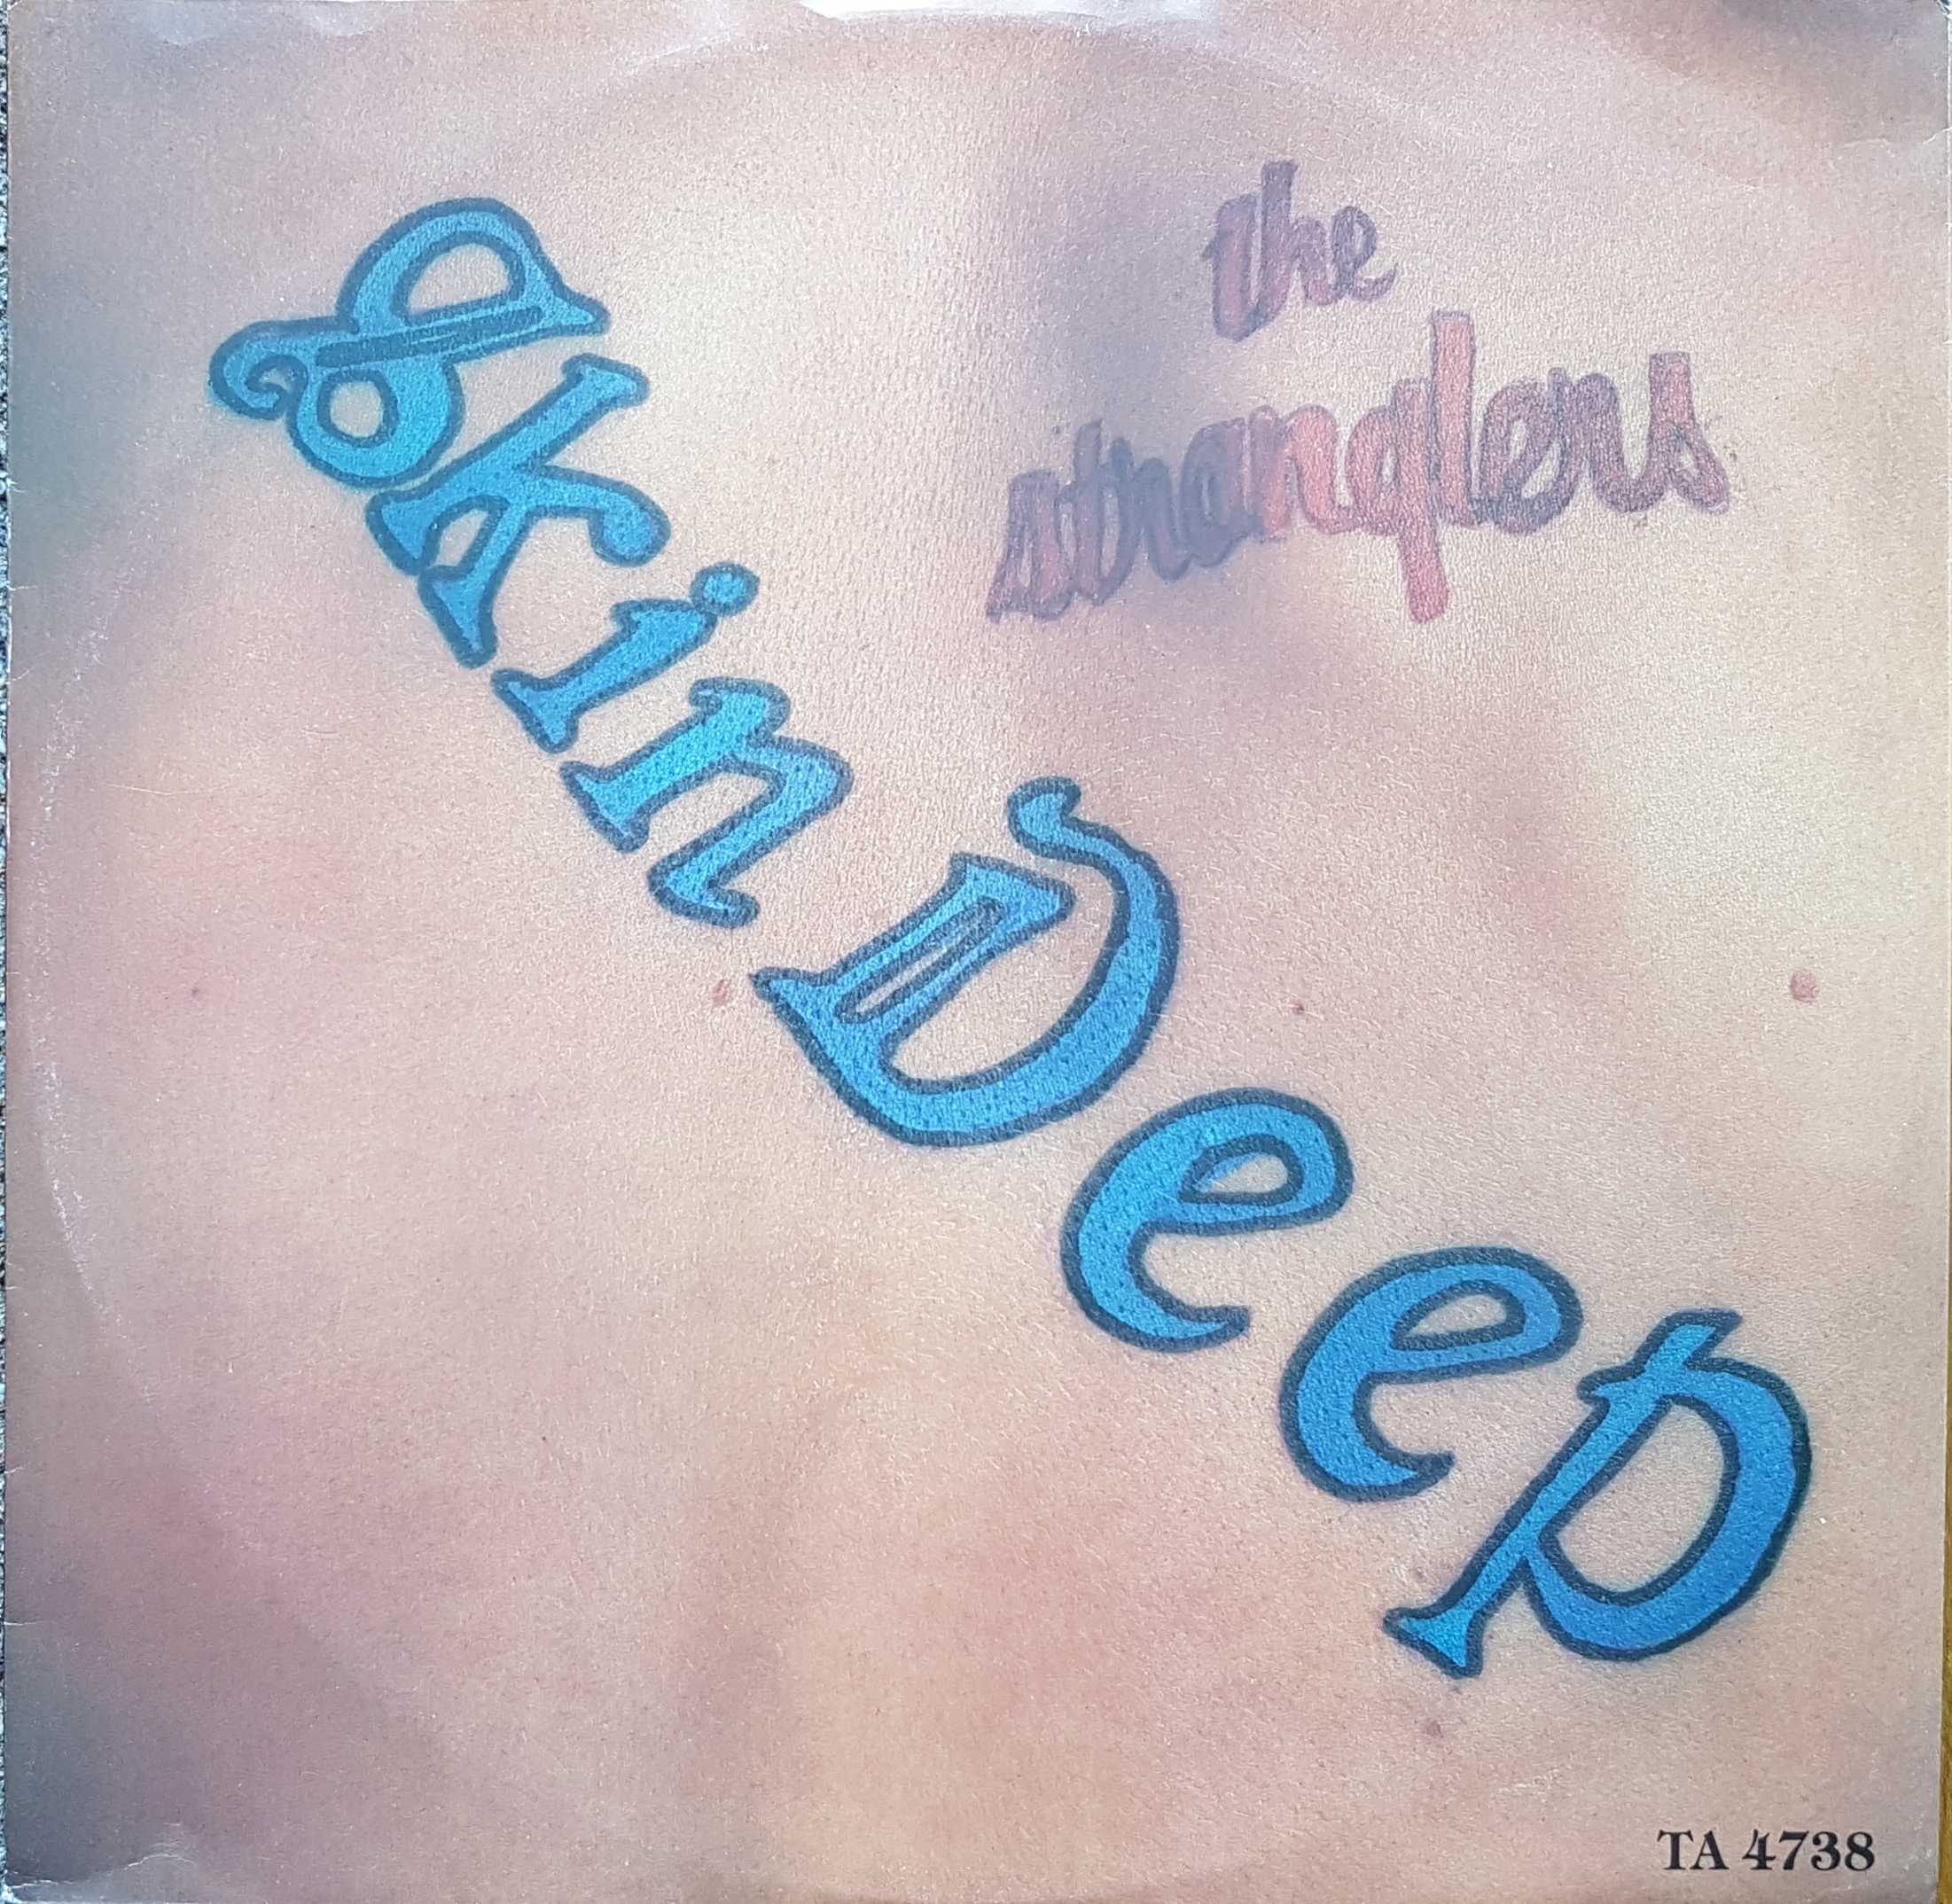 Picture of Skin deep by artist The Stranglers from The Stranglers 12inches